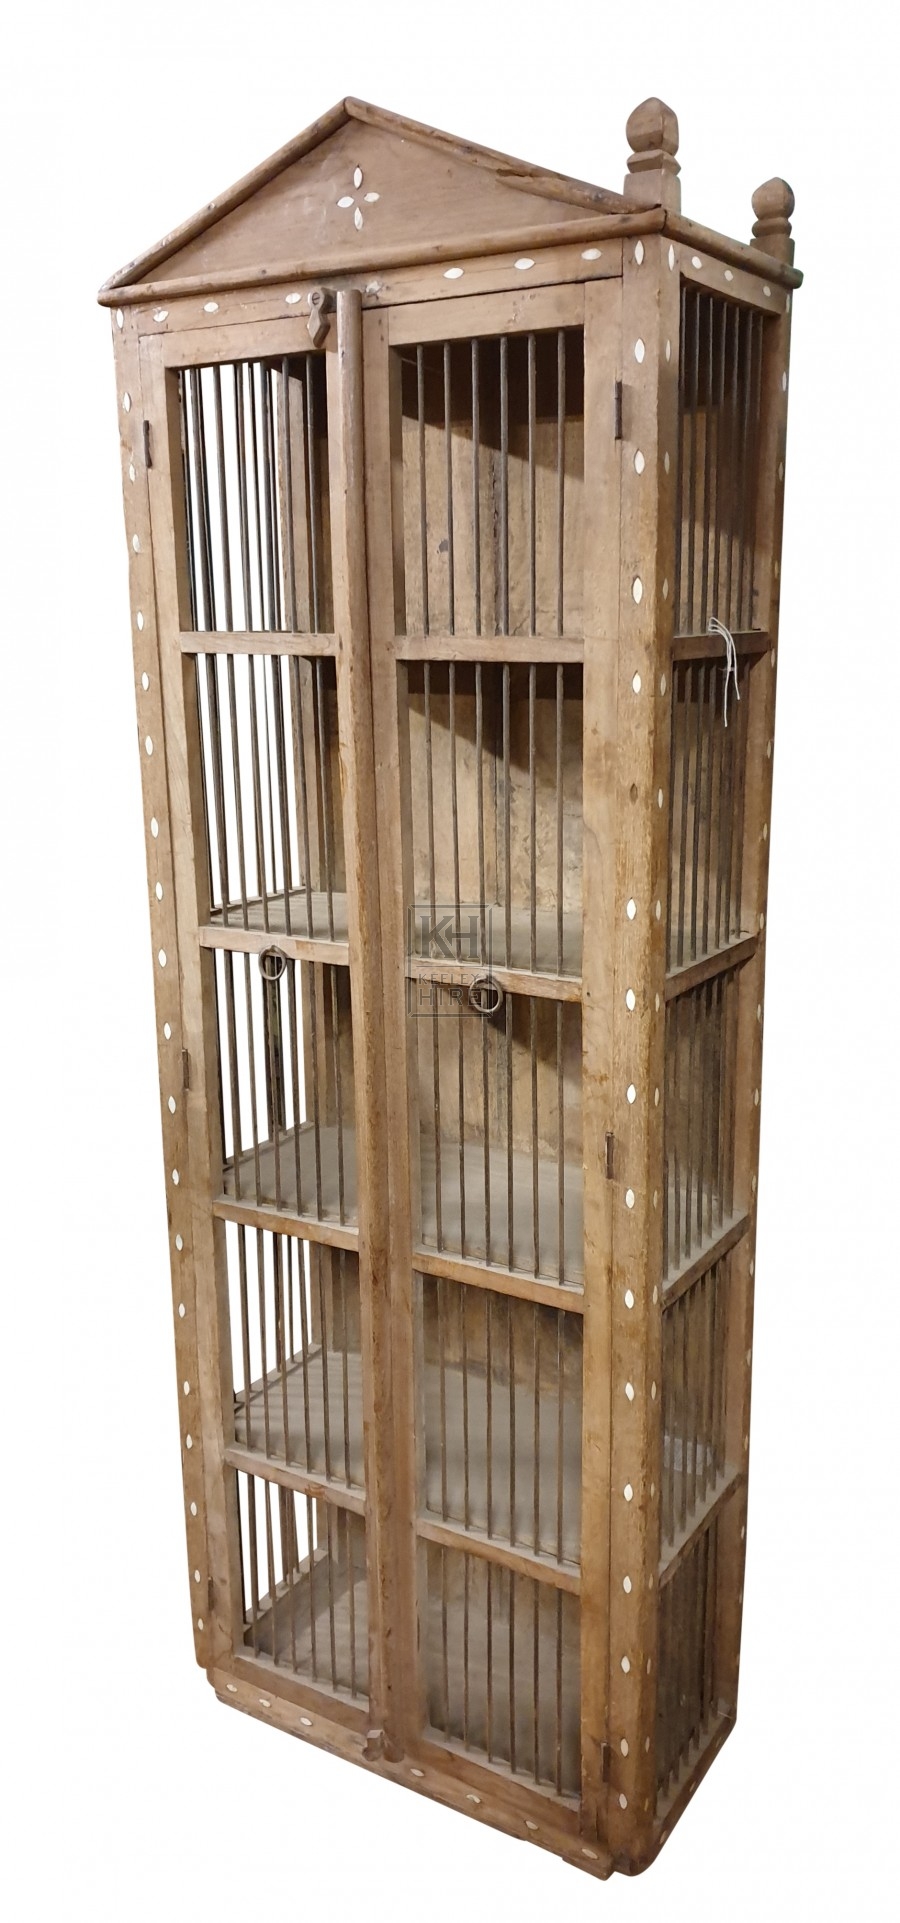 Pointed top freestanding unit with bars